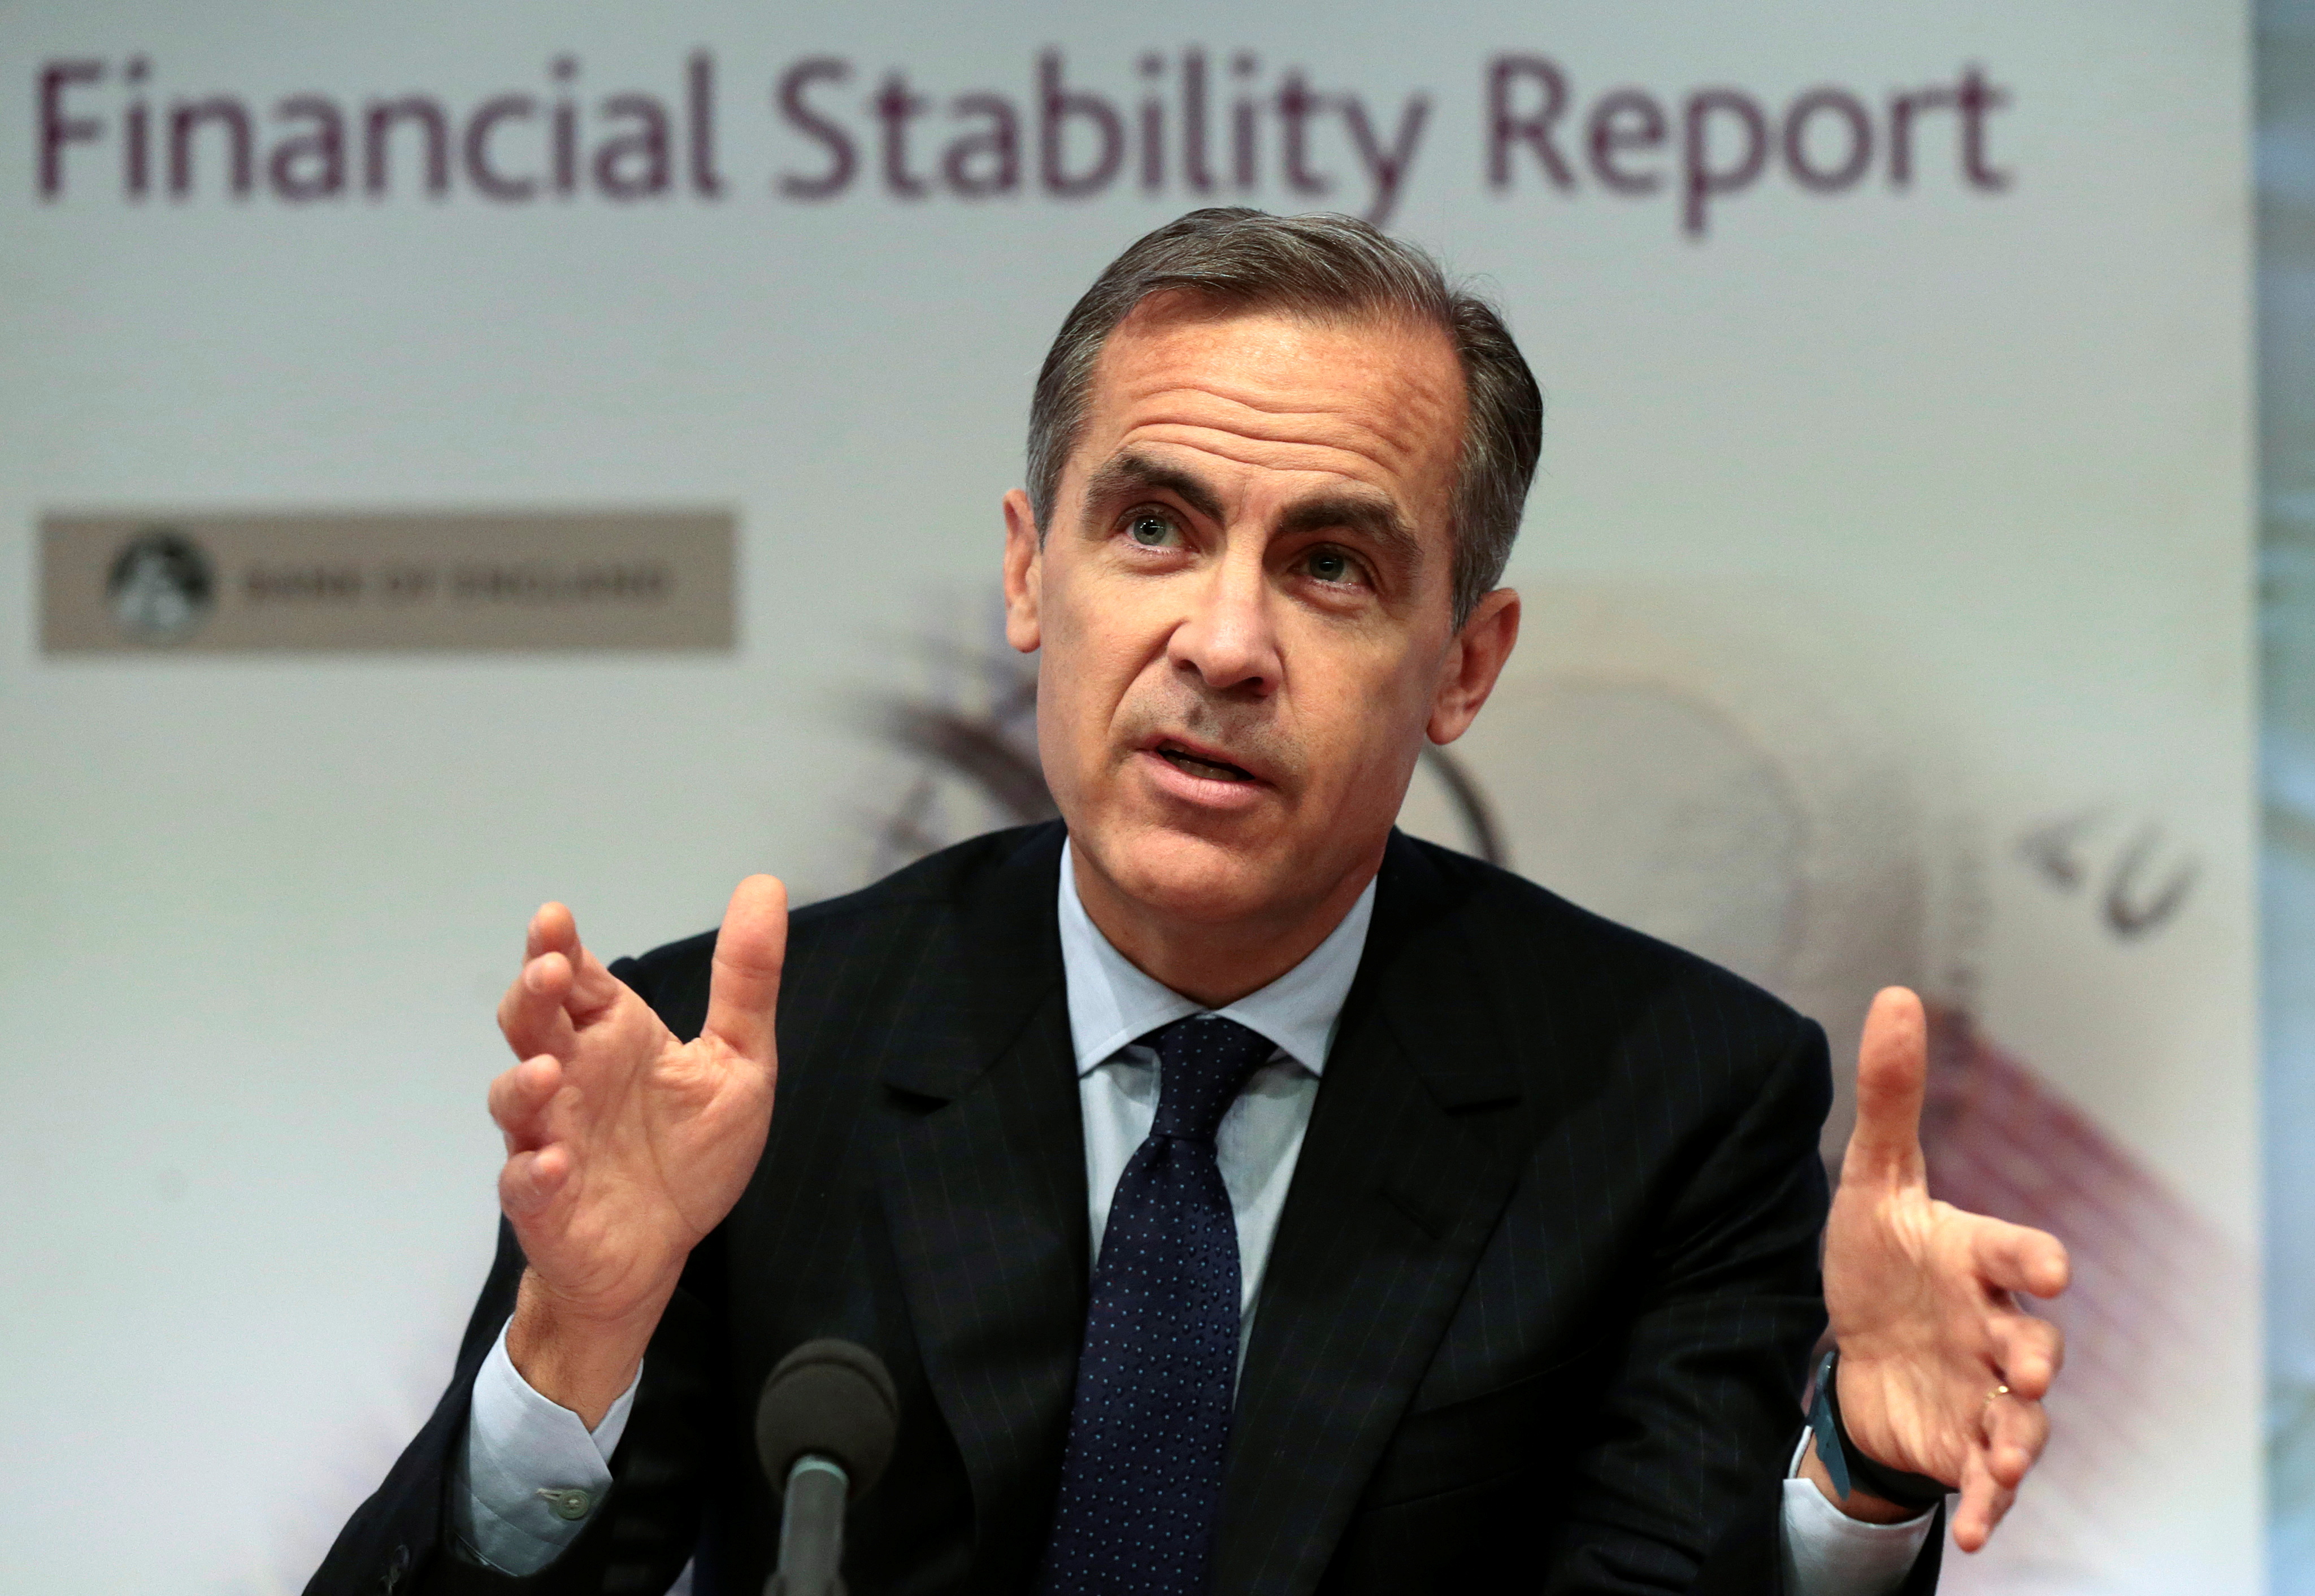 Bank of England governor Mark Carney speaks during a news conference at the Bank of England in London, December 1, 2015.REUTERS/Suzanne Plunkett